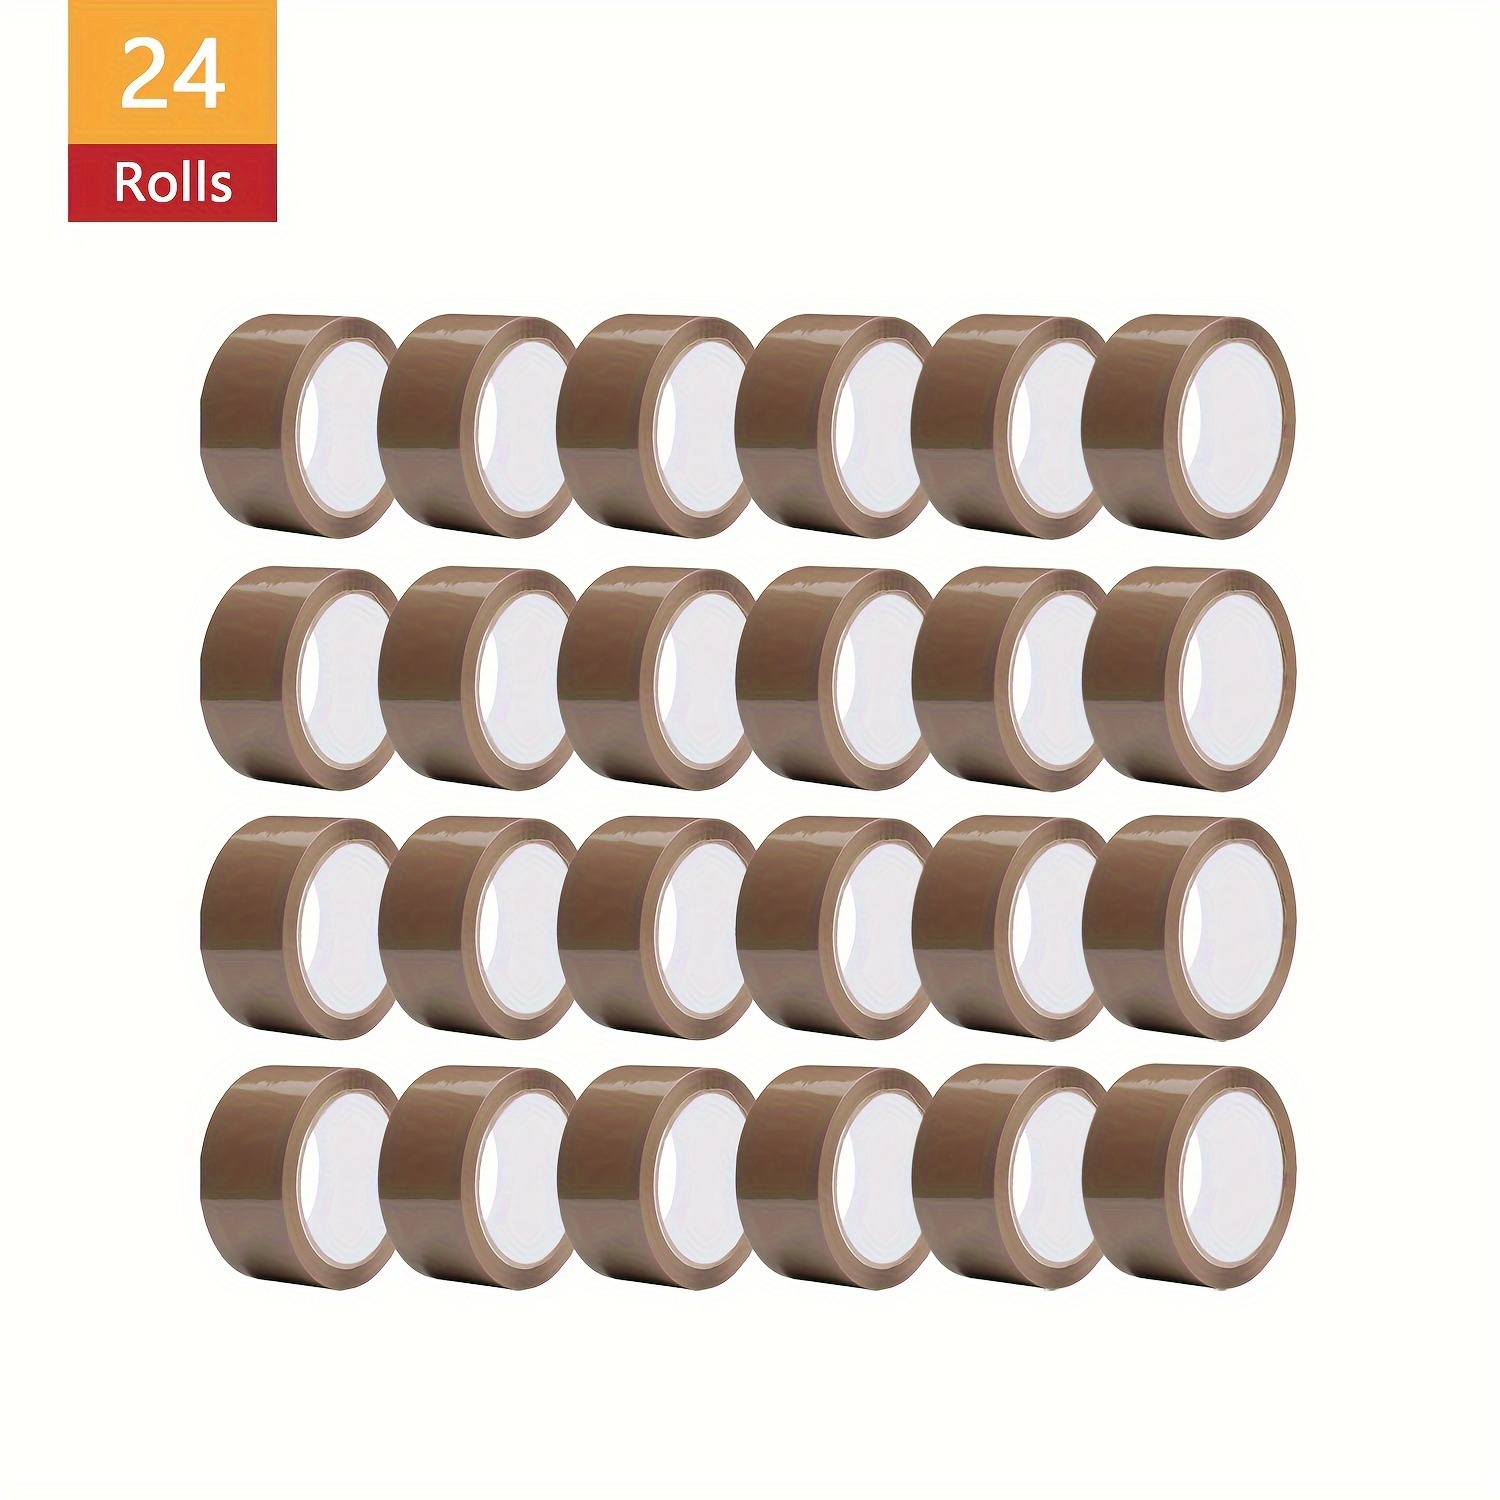 

24 Rolls In A Box Seamlessly Wrapped Items Brown Tape, 3 Inch X 110 Yard Heavy Duty Brown Packaging, Industrial Shipping Boxes Clear Packing Tape For Moving, Office, Home